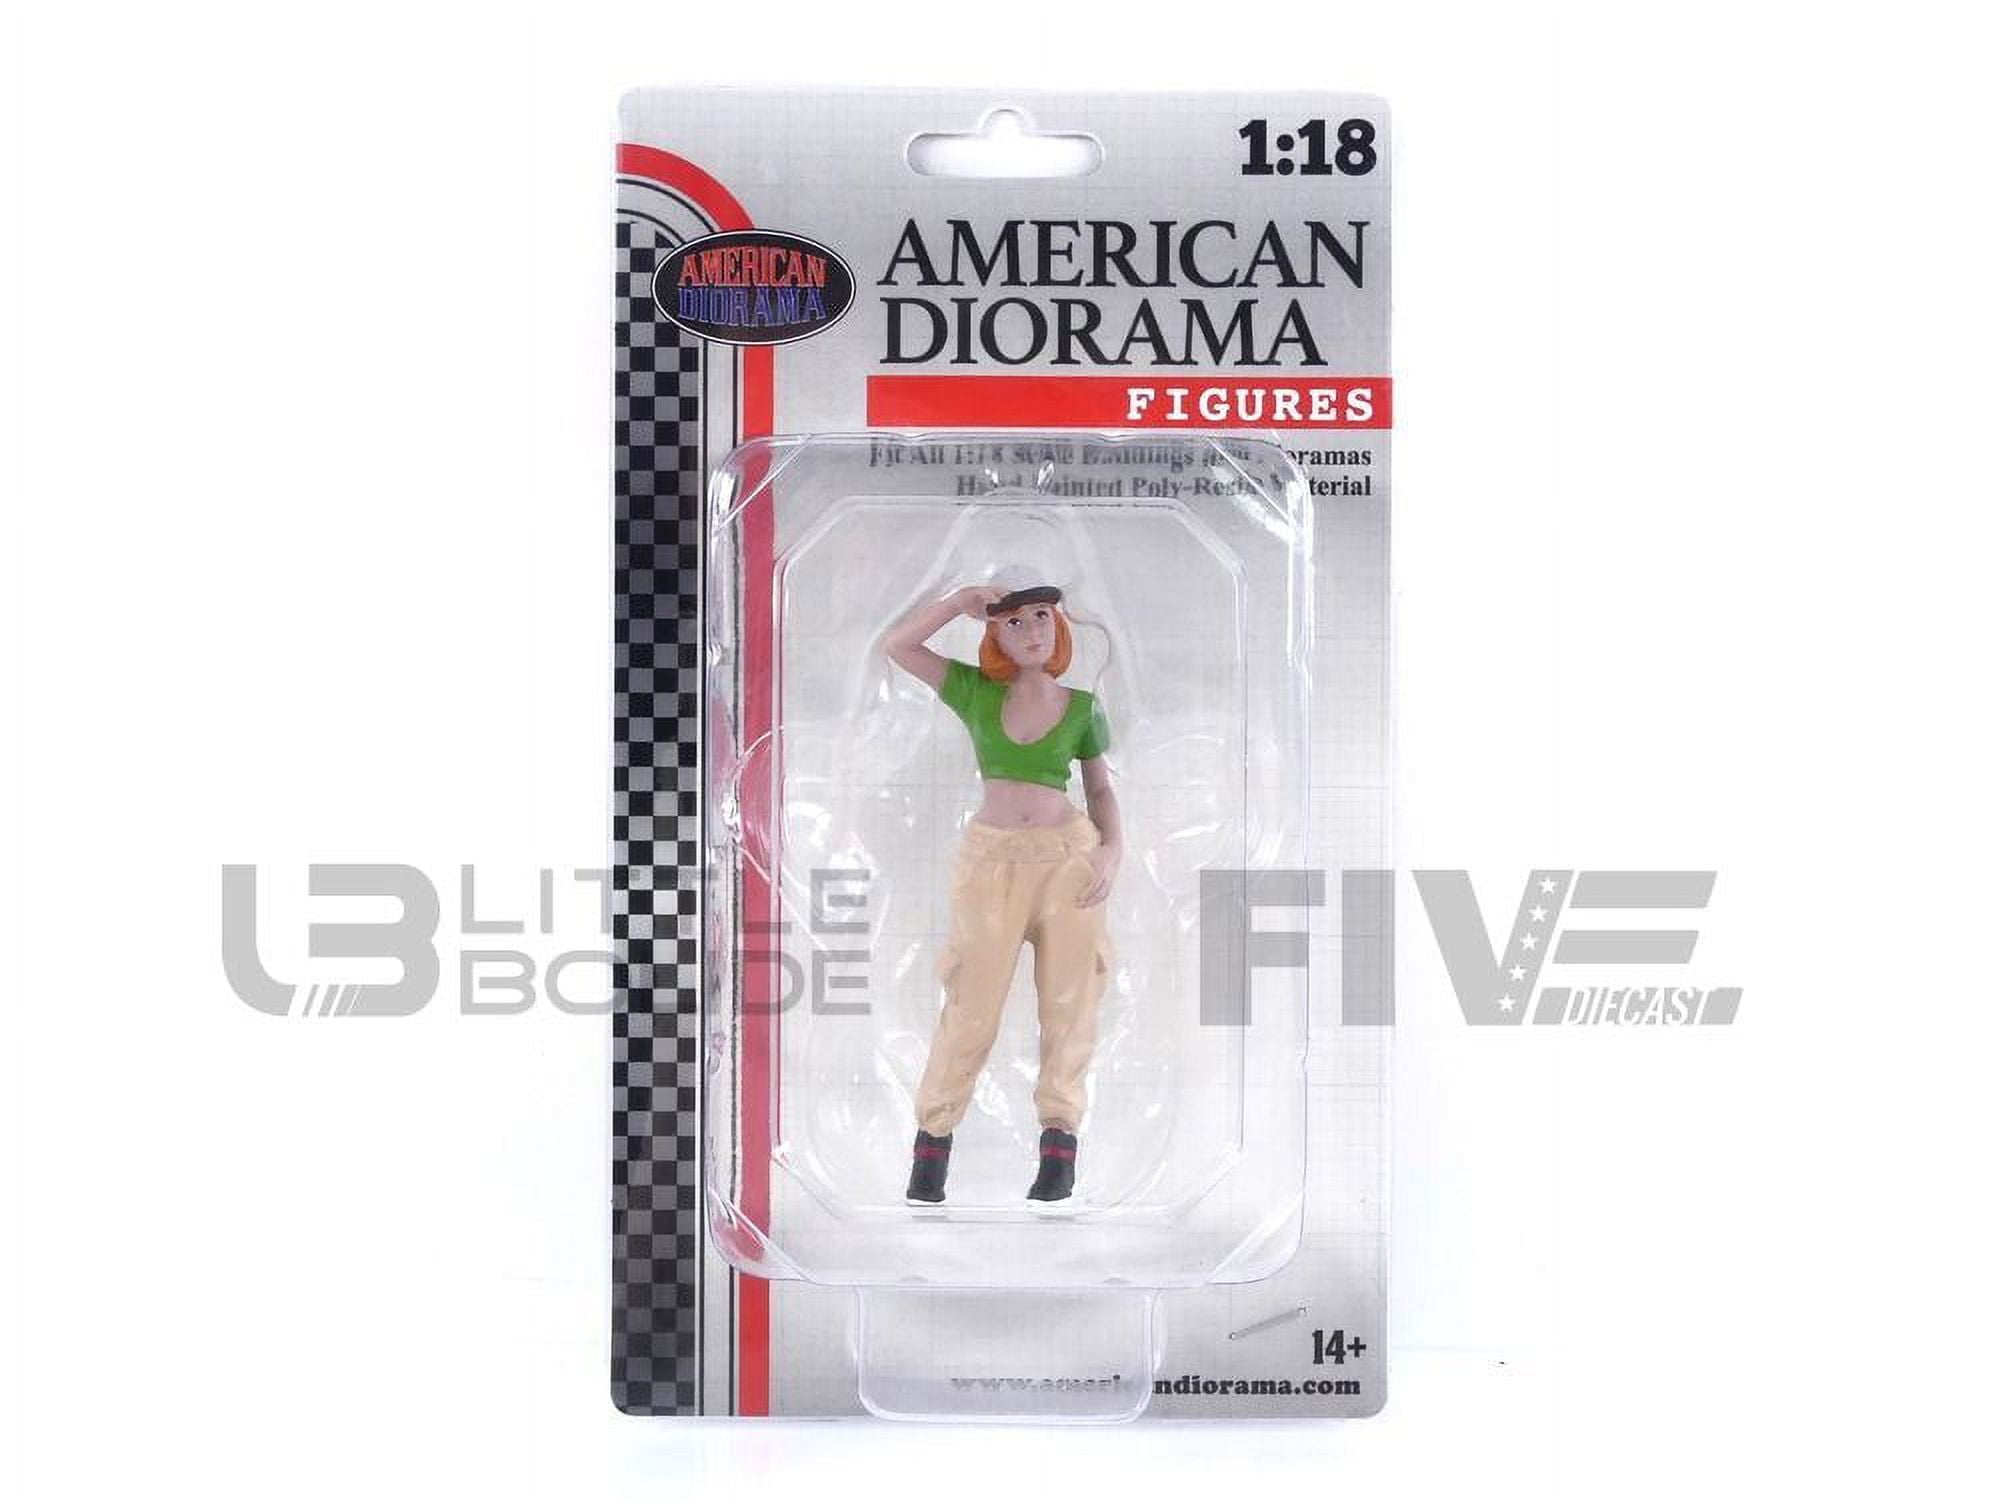 Picture of American Diorama AD18101 Hip Hop Girls 1 for 1 by 18 Scale Models Figure